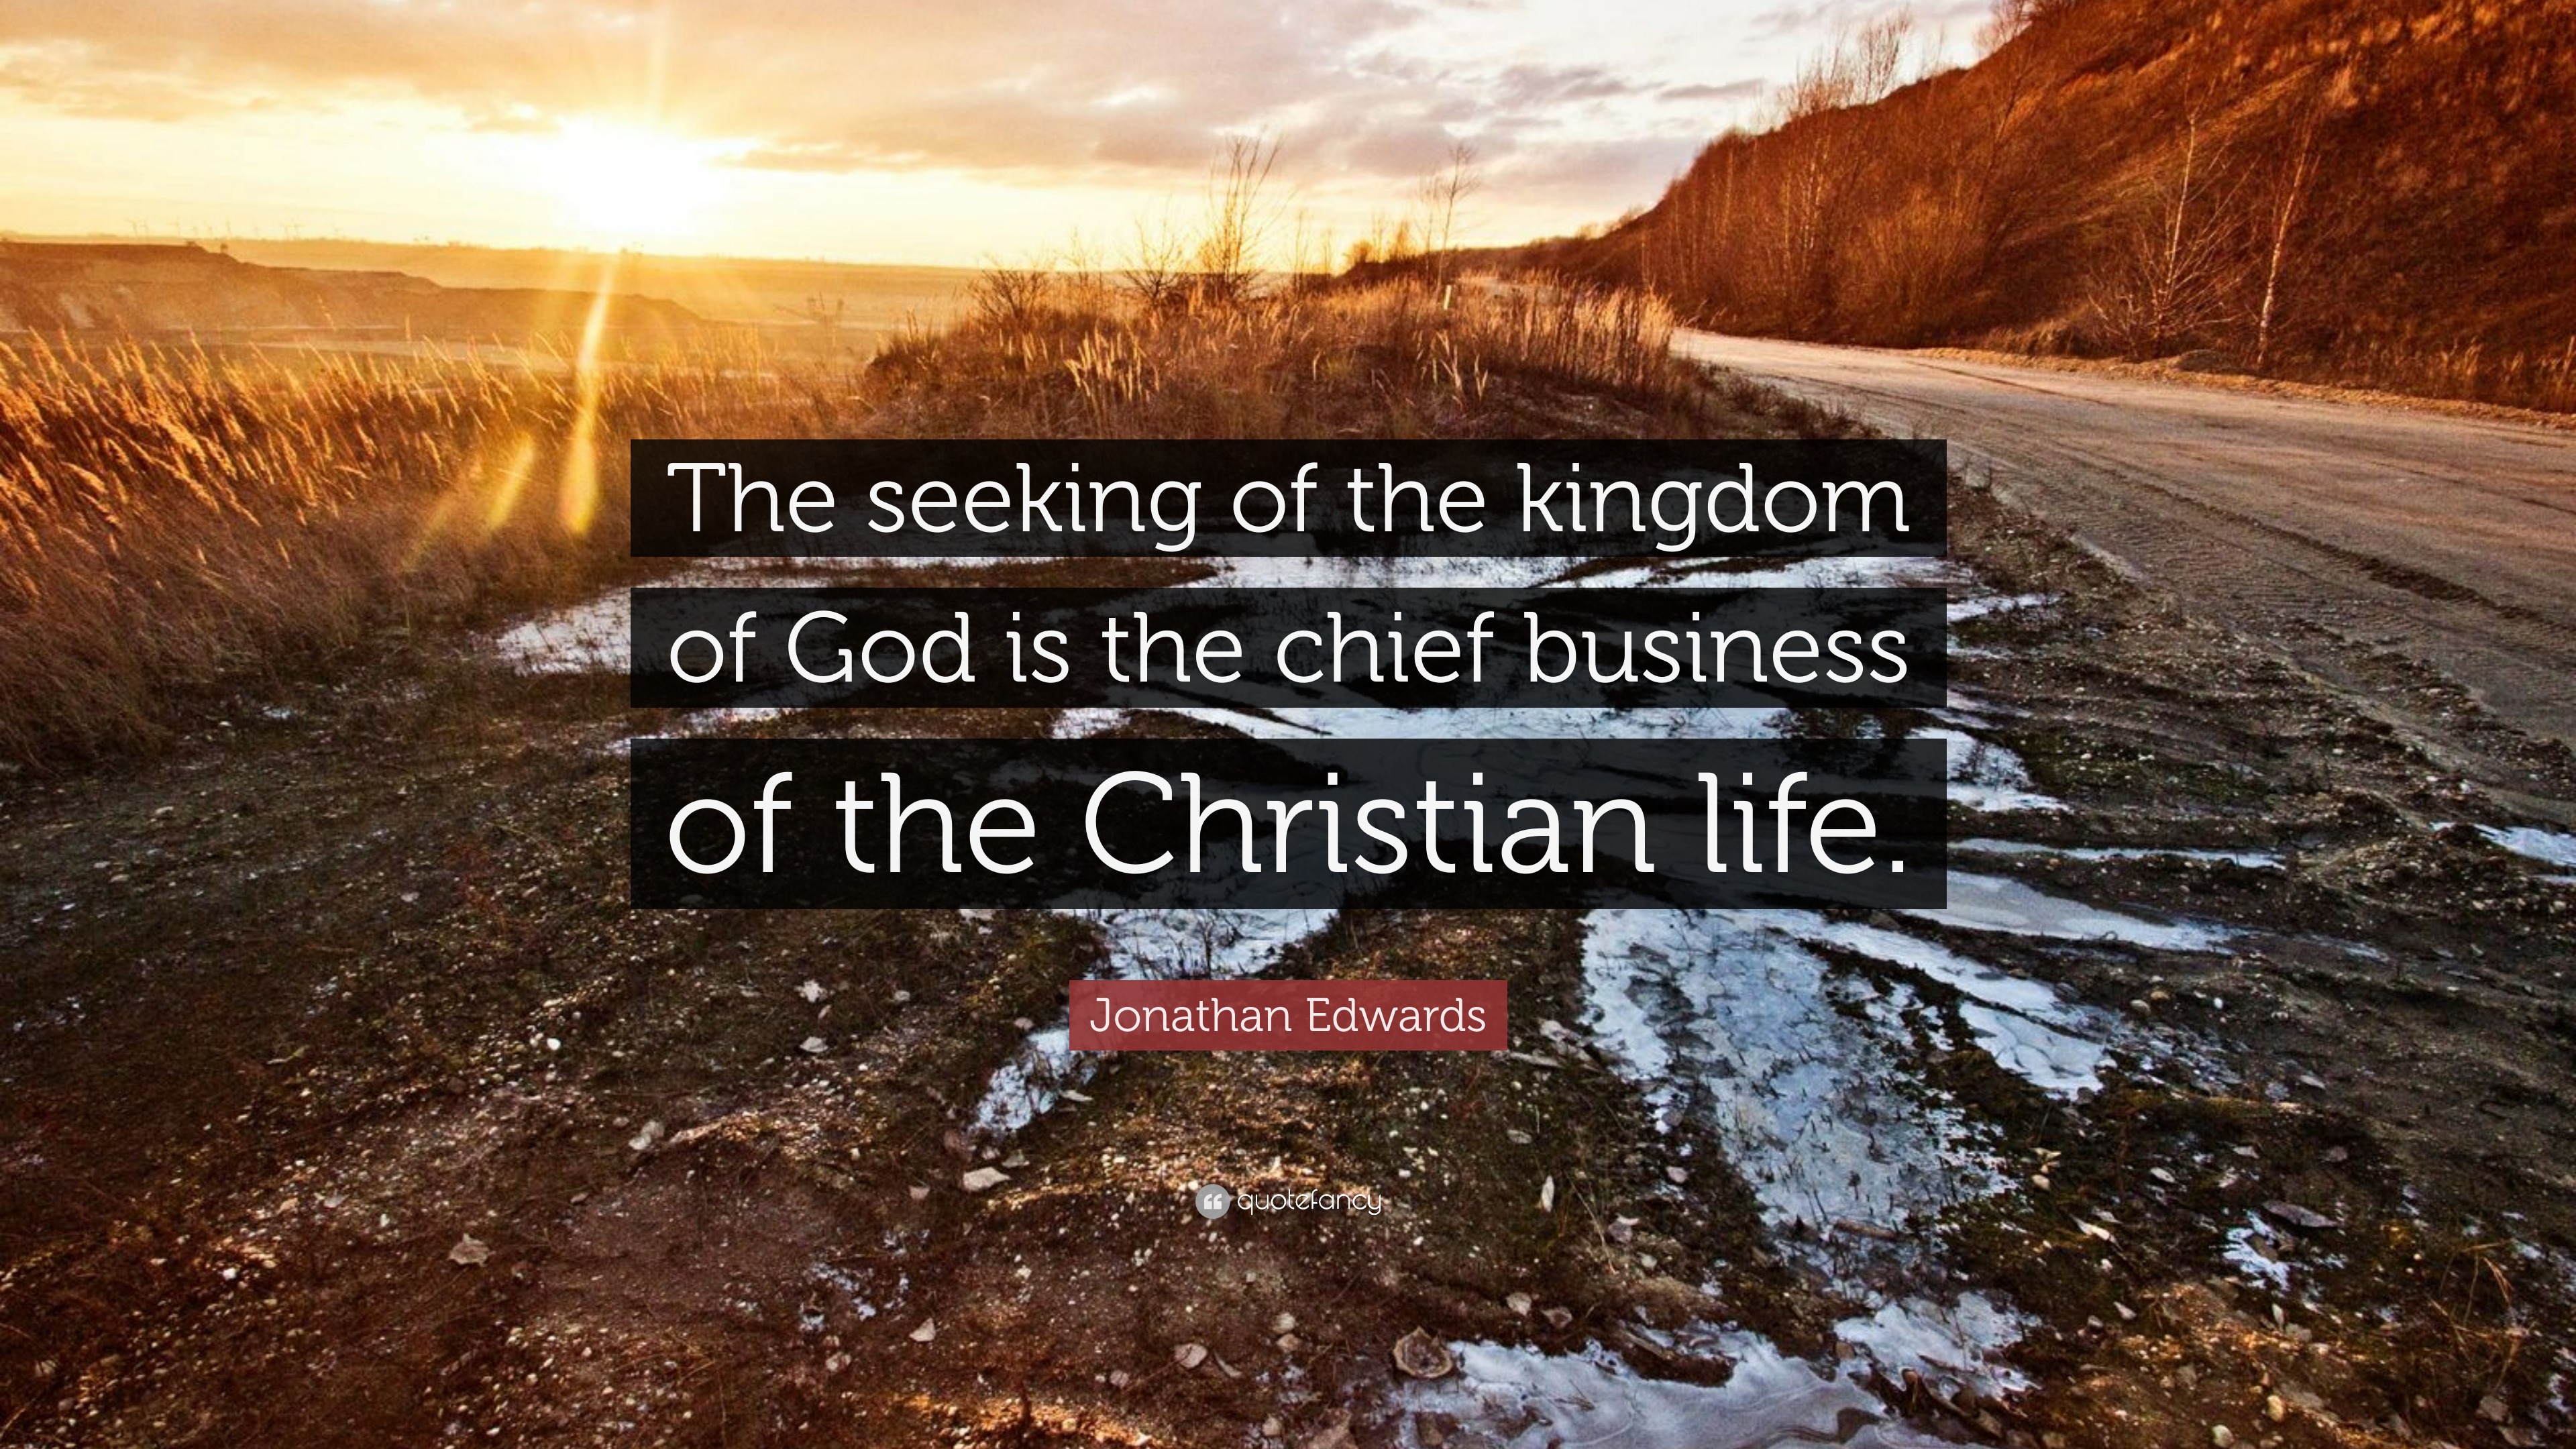 Jonathan Edwards Quote: “The seeking of the kingdom of God is the chief